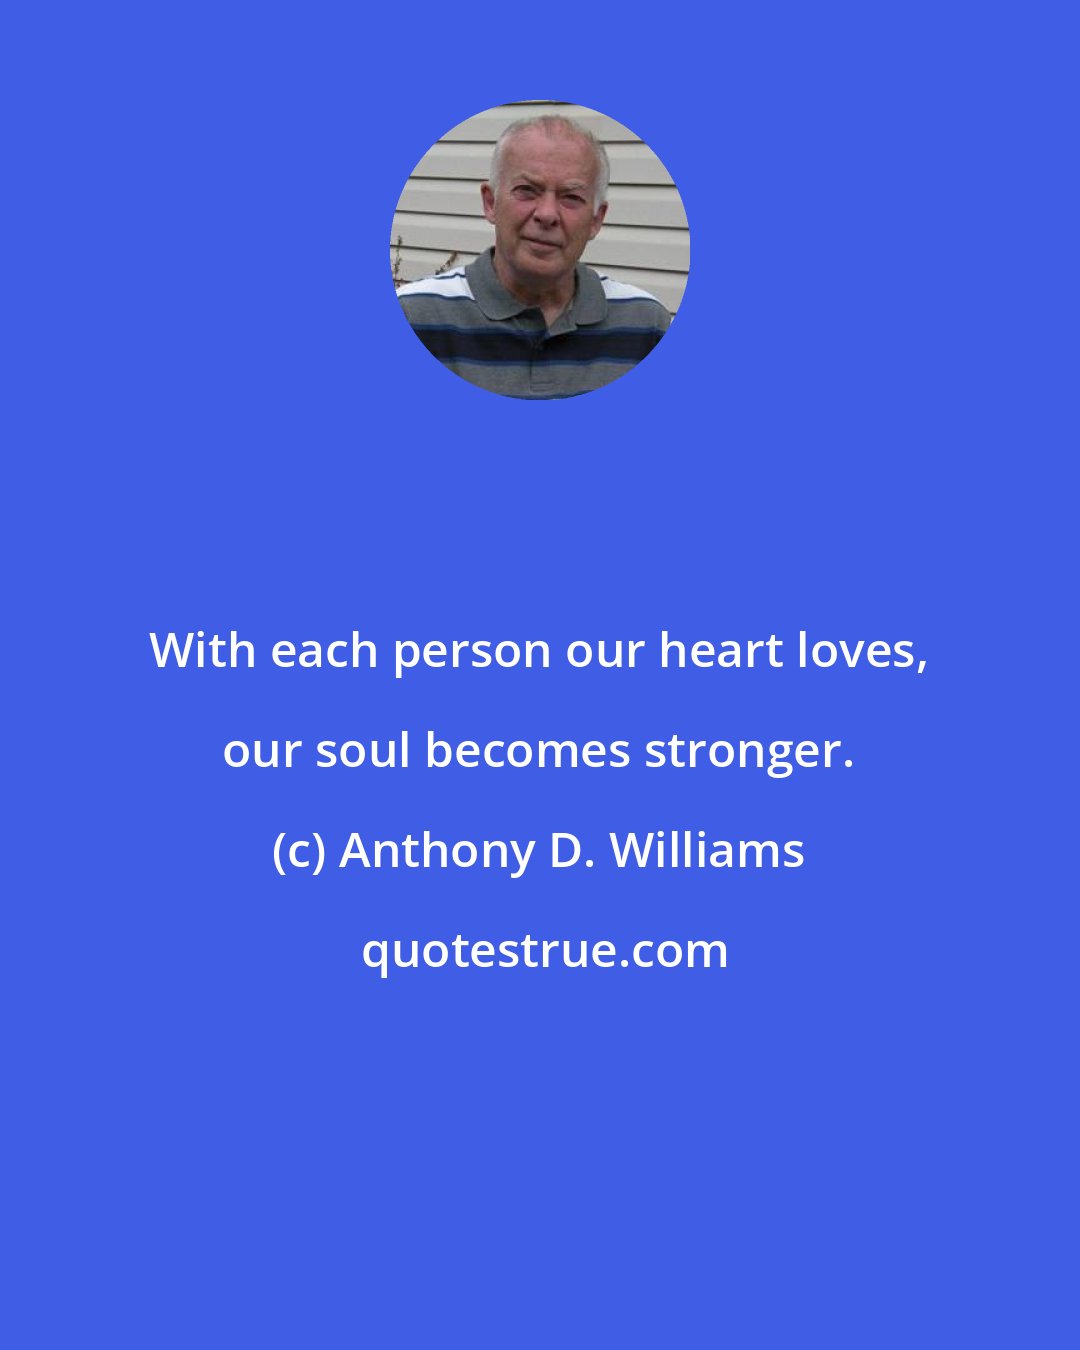 Anthony D. Williams: With each person our heart loves, our soul becomes stronger.